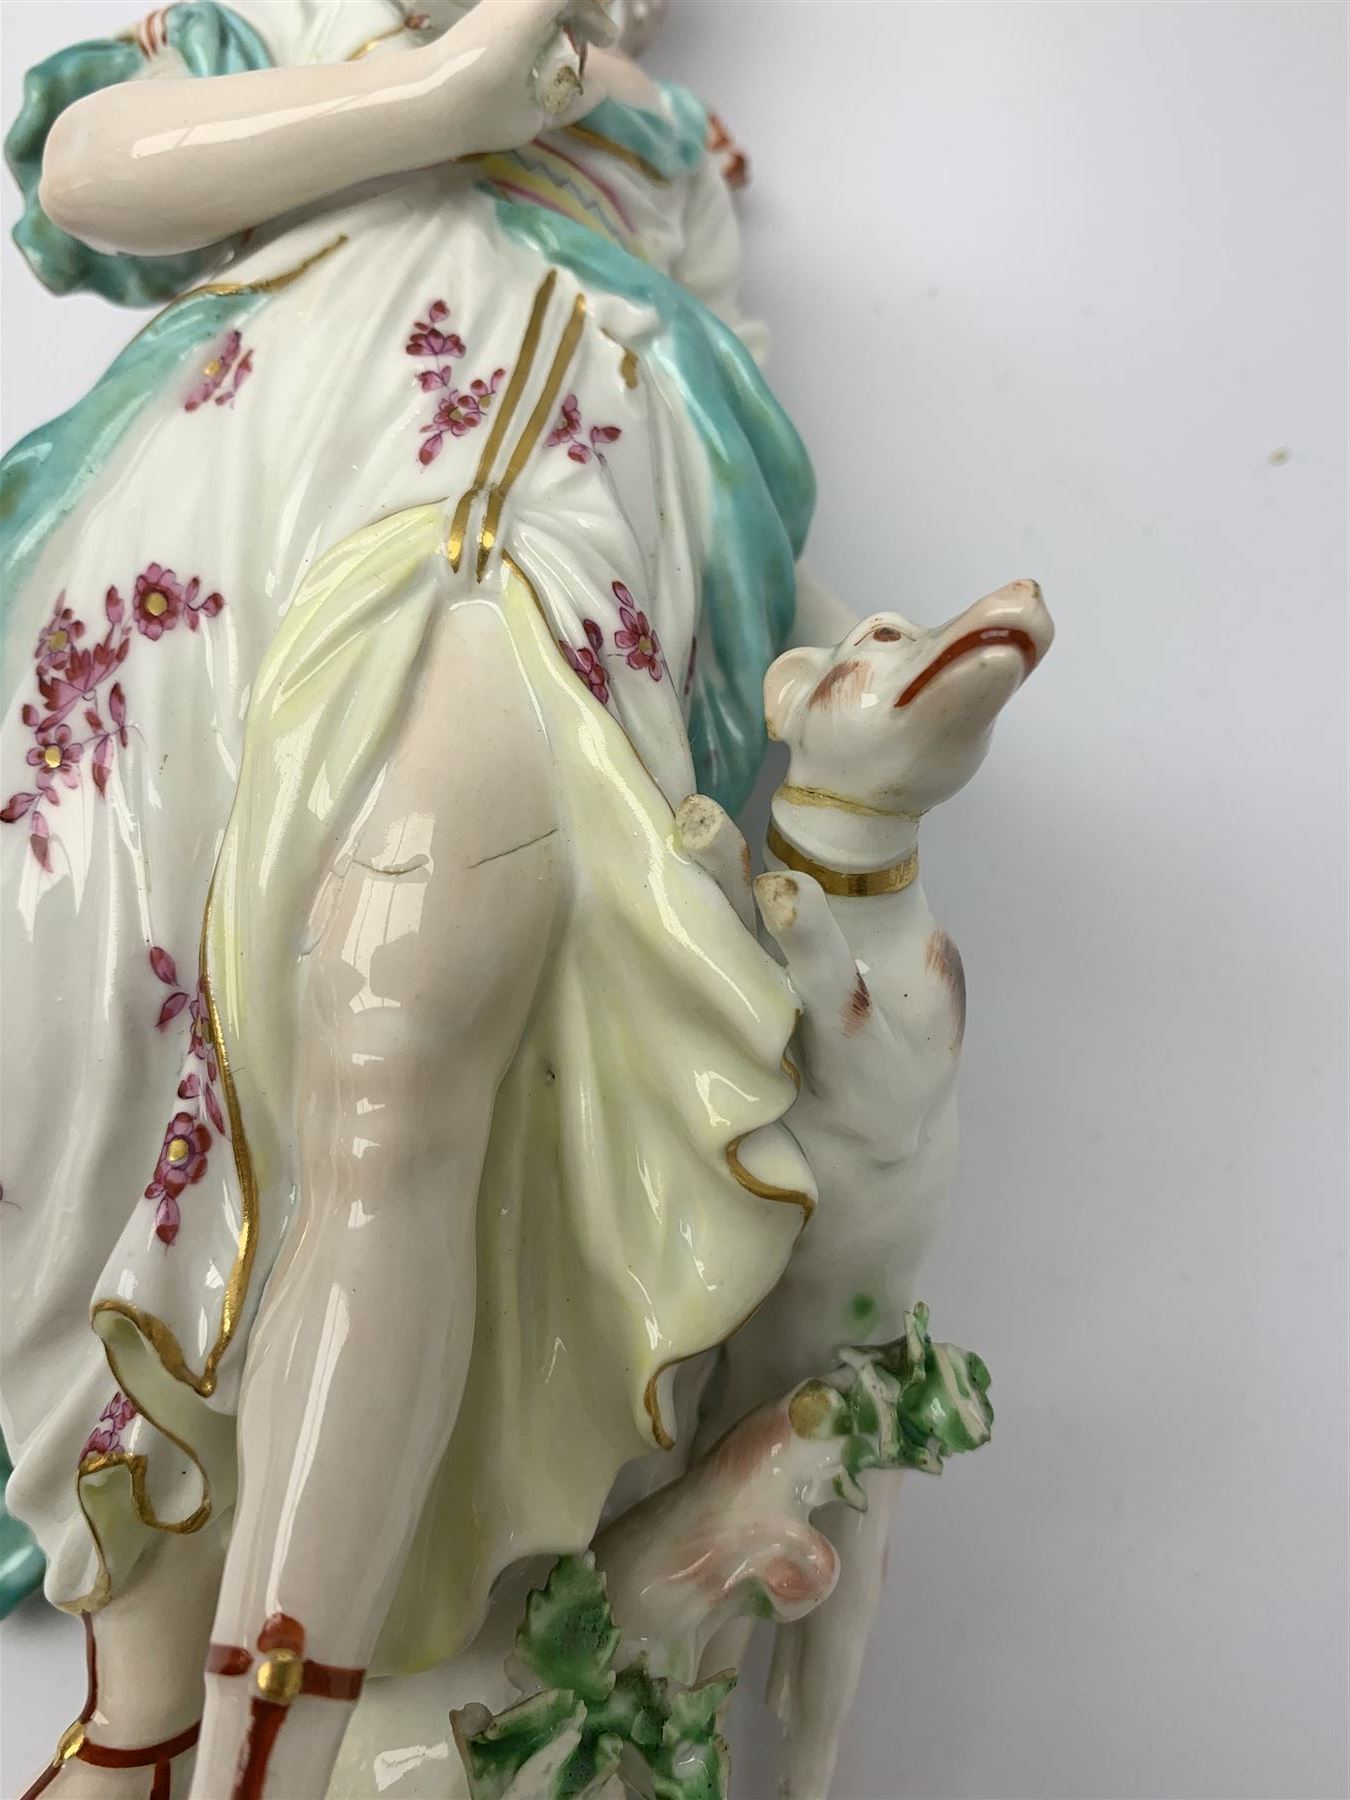 Mid 18th century Derby porcelain figure modelled as Dianna the Huntress - Image 8 of 9